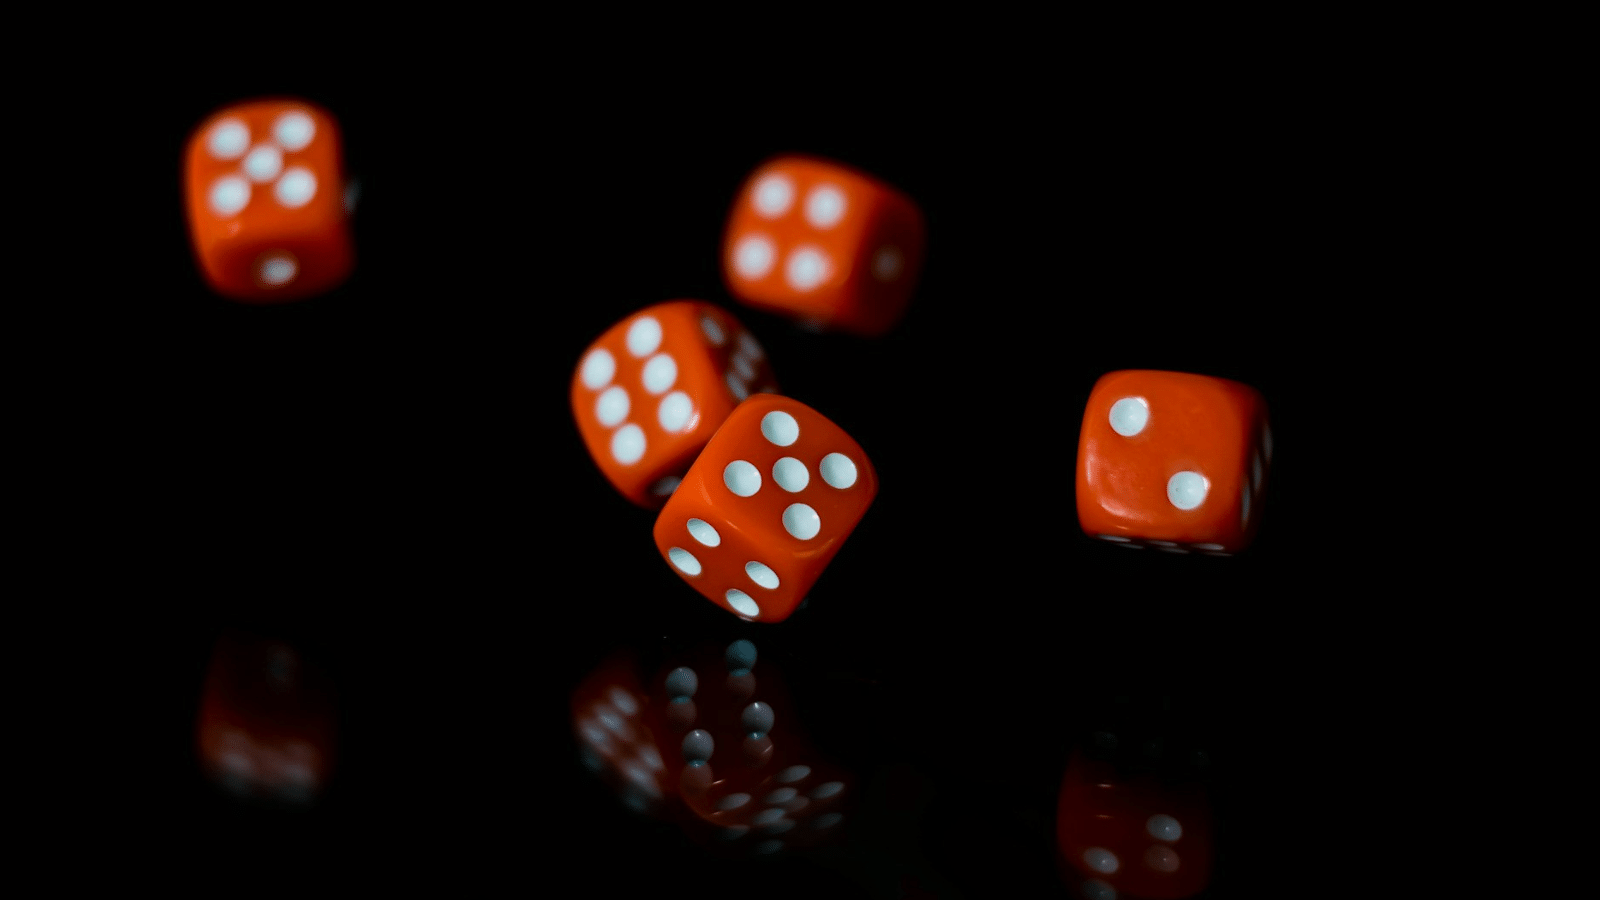 Tumbling dice, illustration for science fiction story Art and Artifice